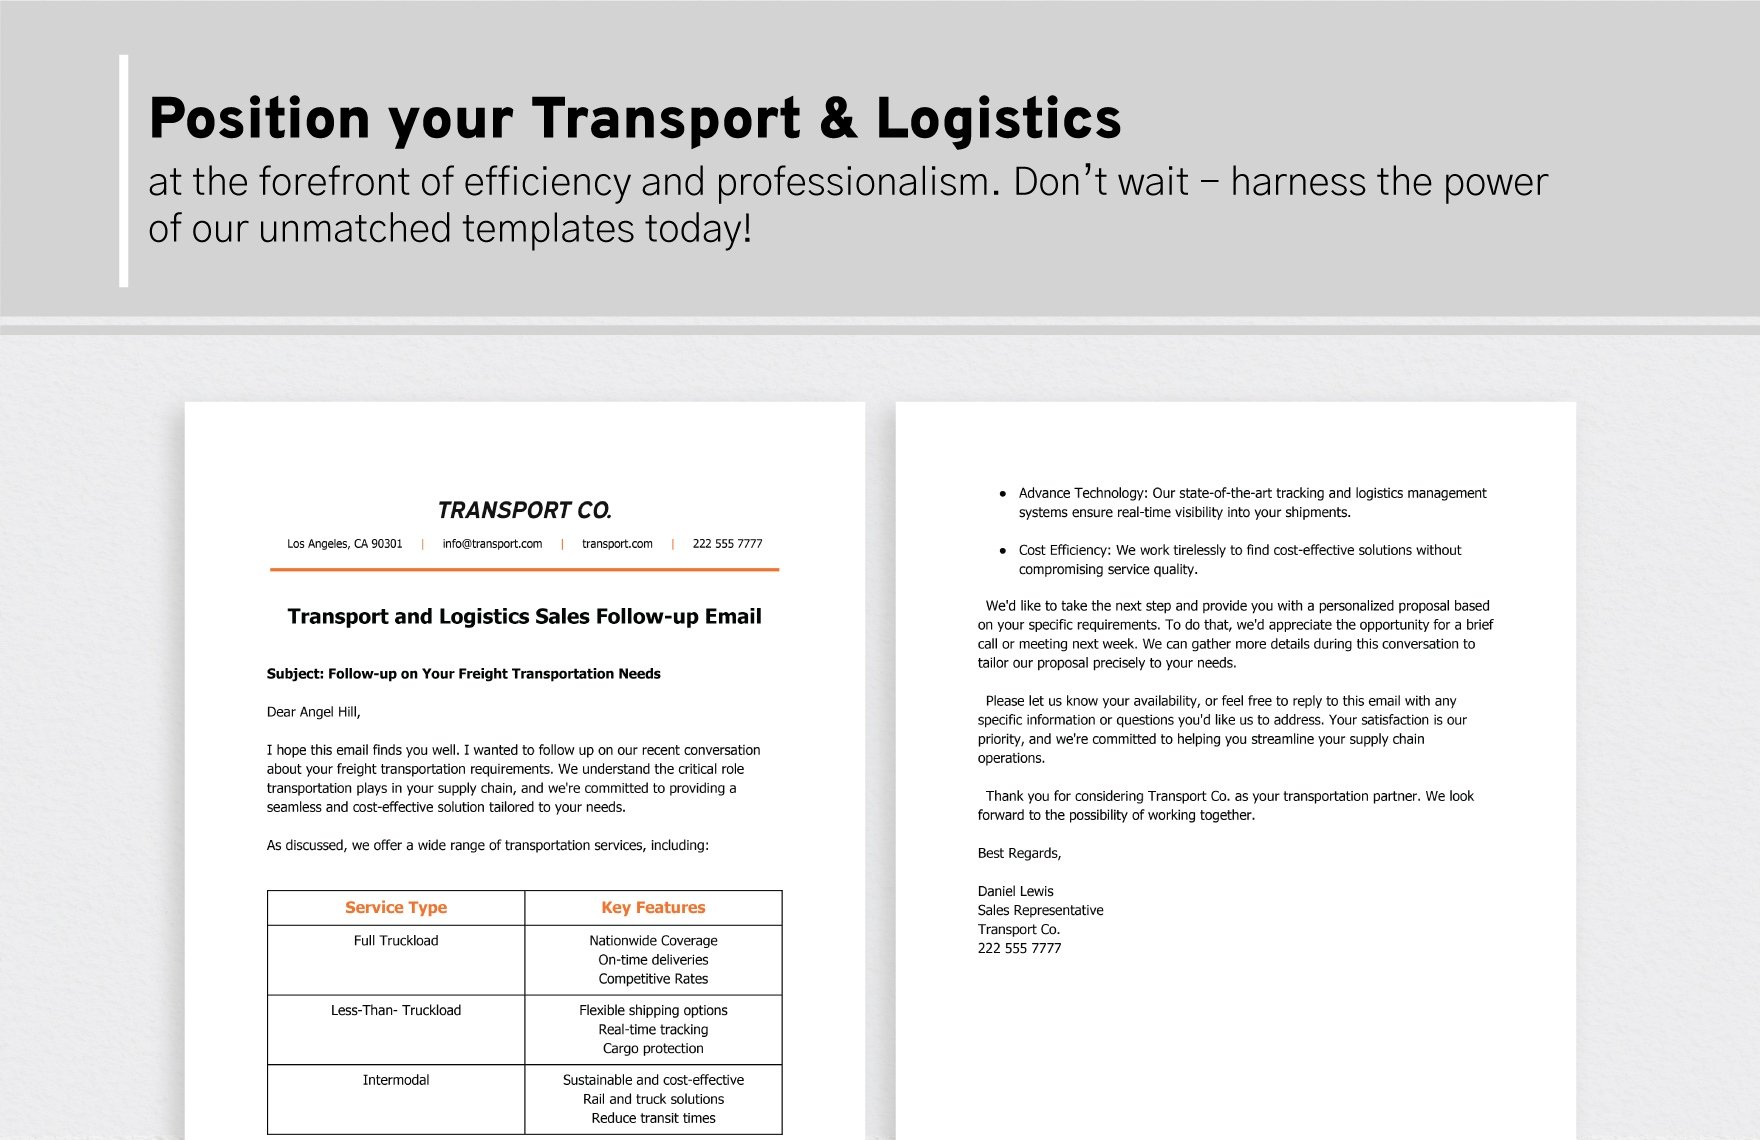 Transport and Logistics Sales Follow-up Email Template